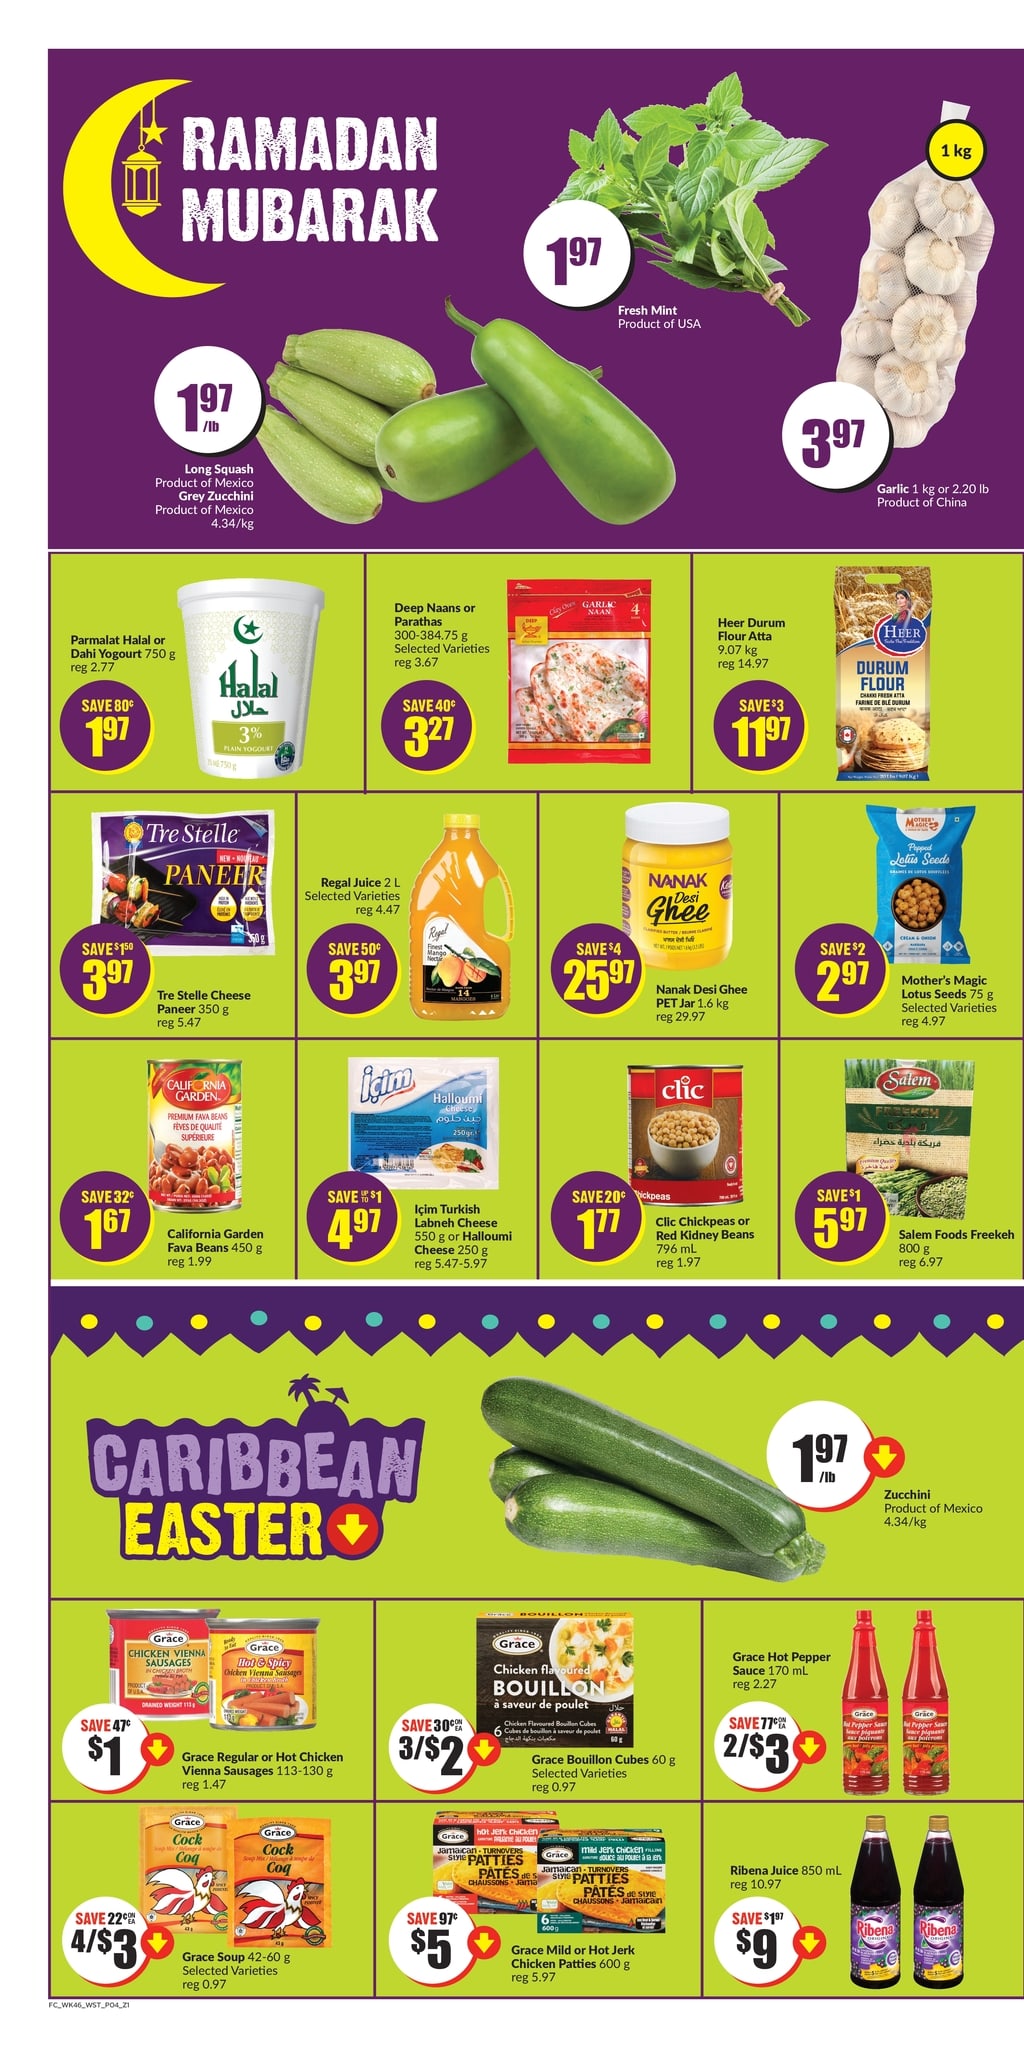 FreshCo - British Columbia - Weekly Flyer Specials - Page 4